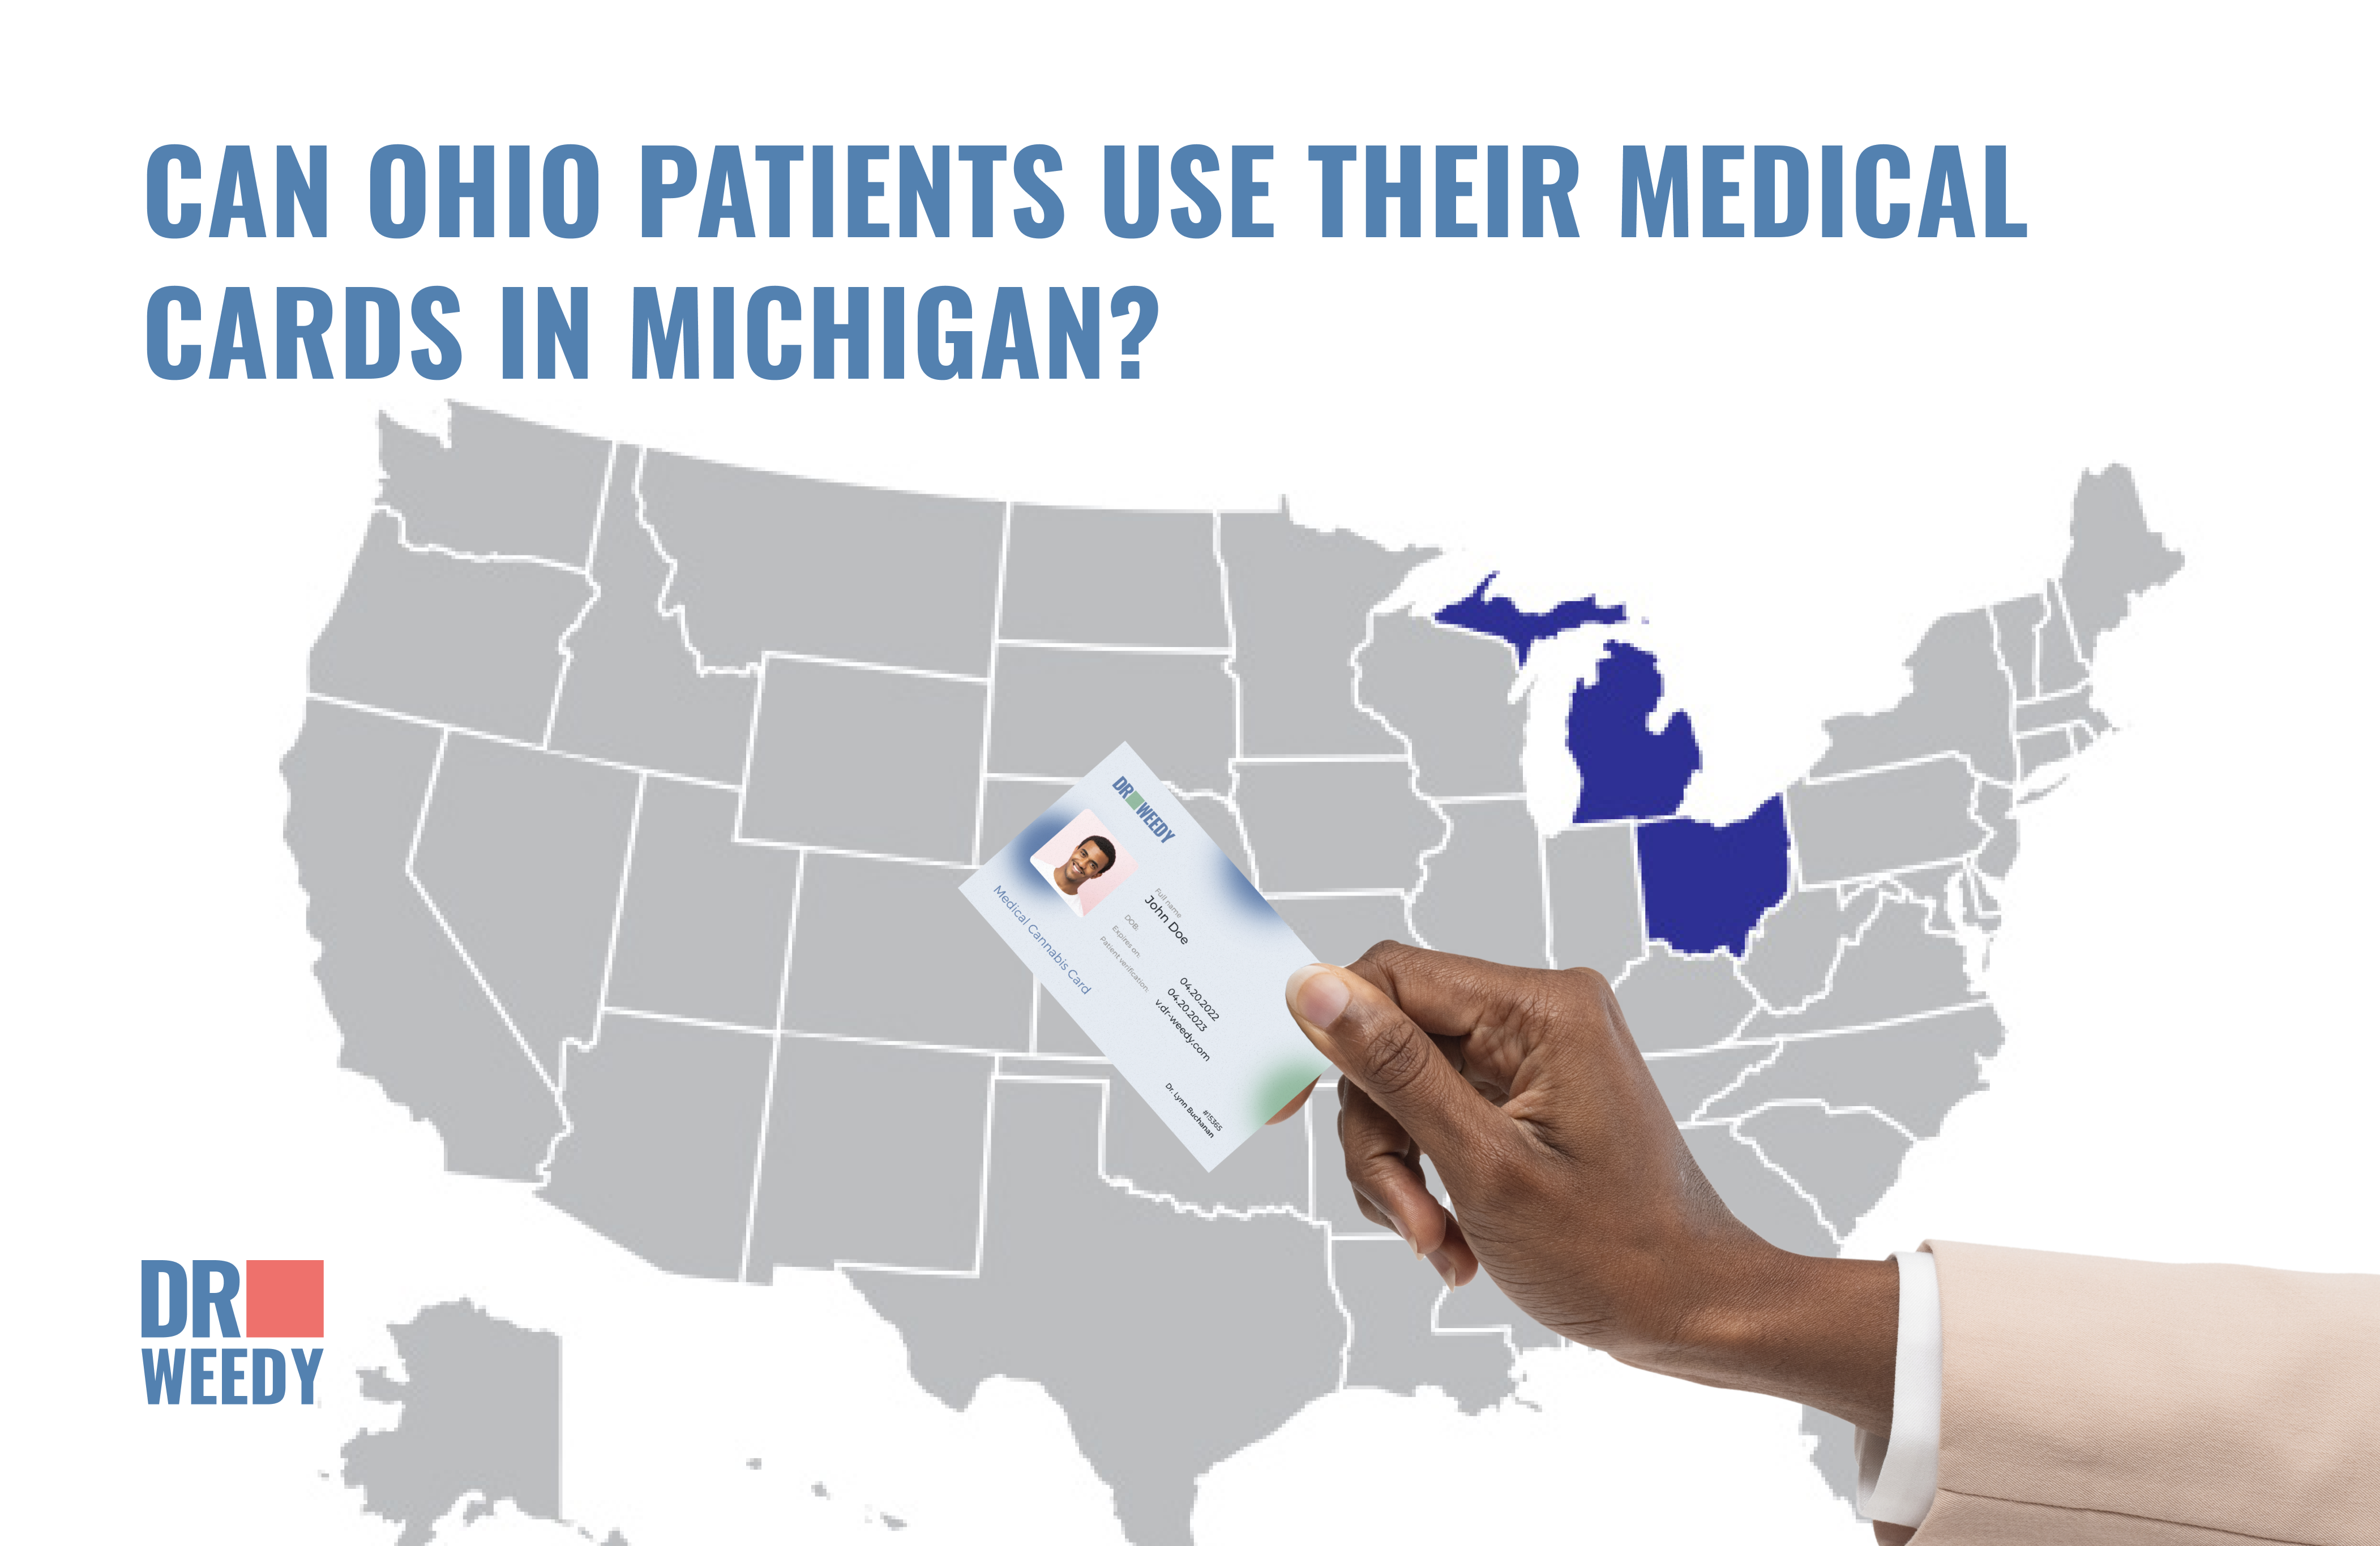 Can Ohio Patients Use Their Medical Cards in Michigan?